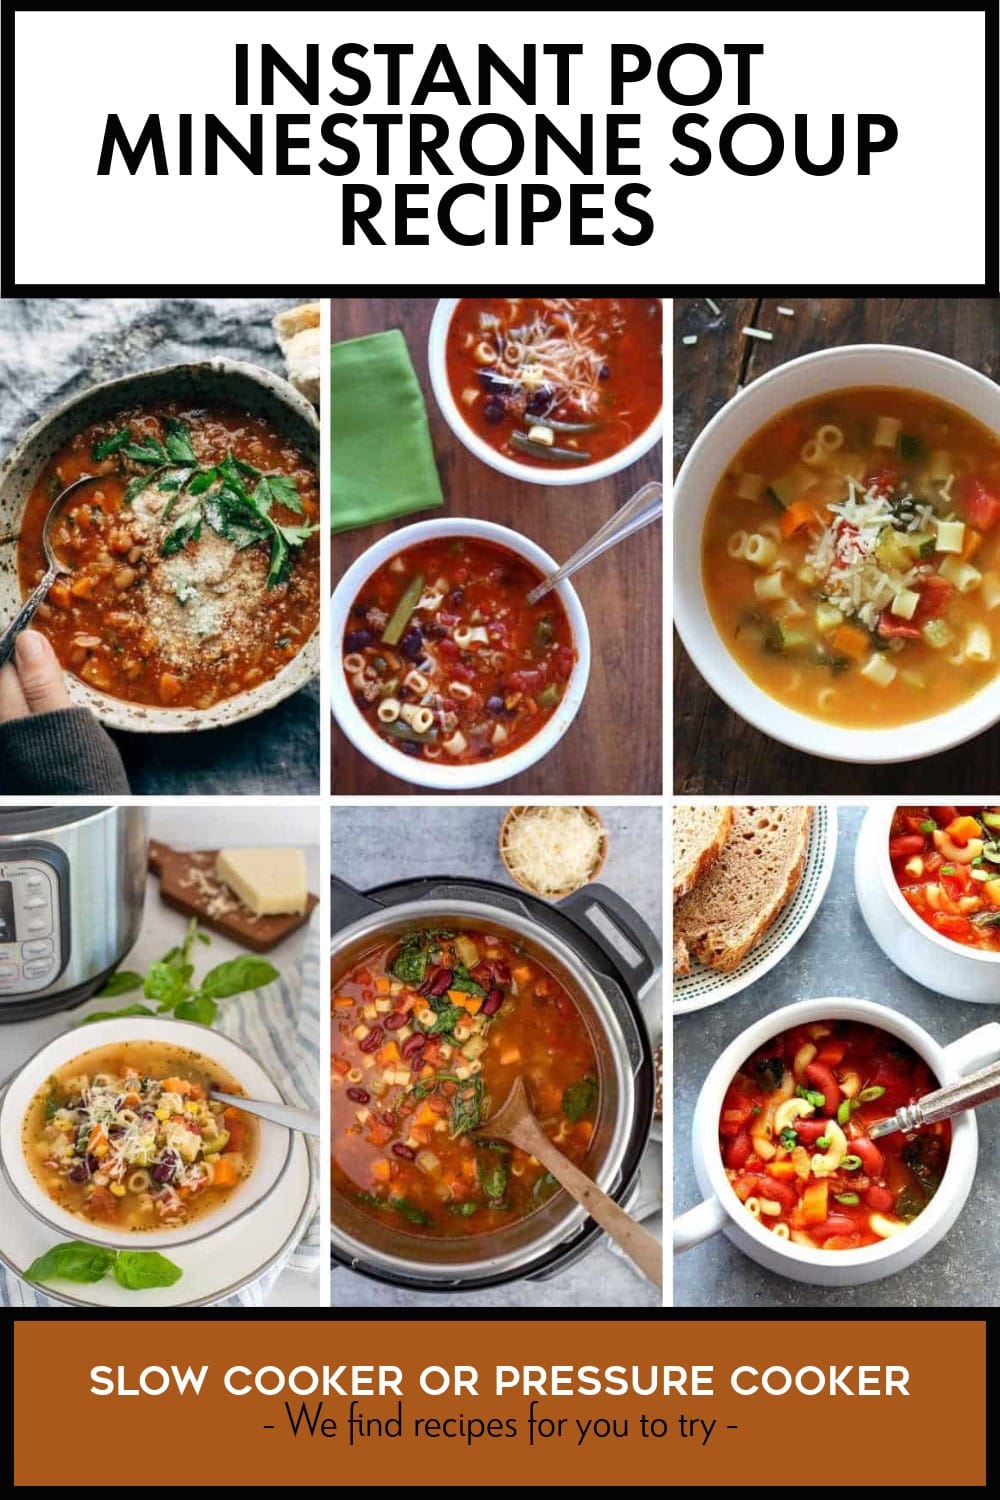 Pinterest image of Instant Pot Minestrone Soup Recipes